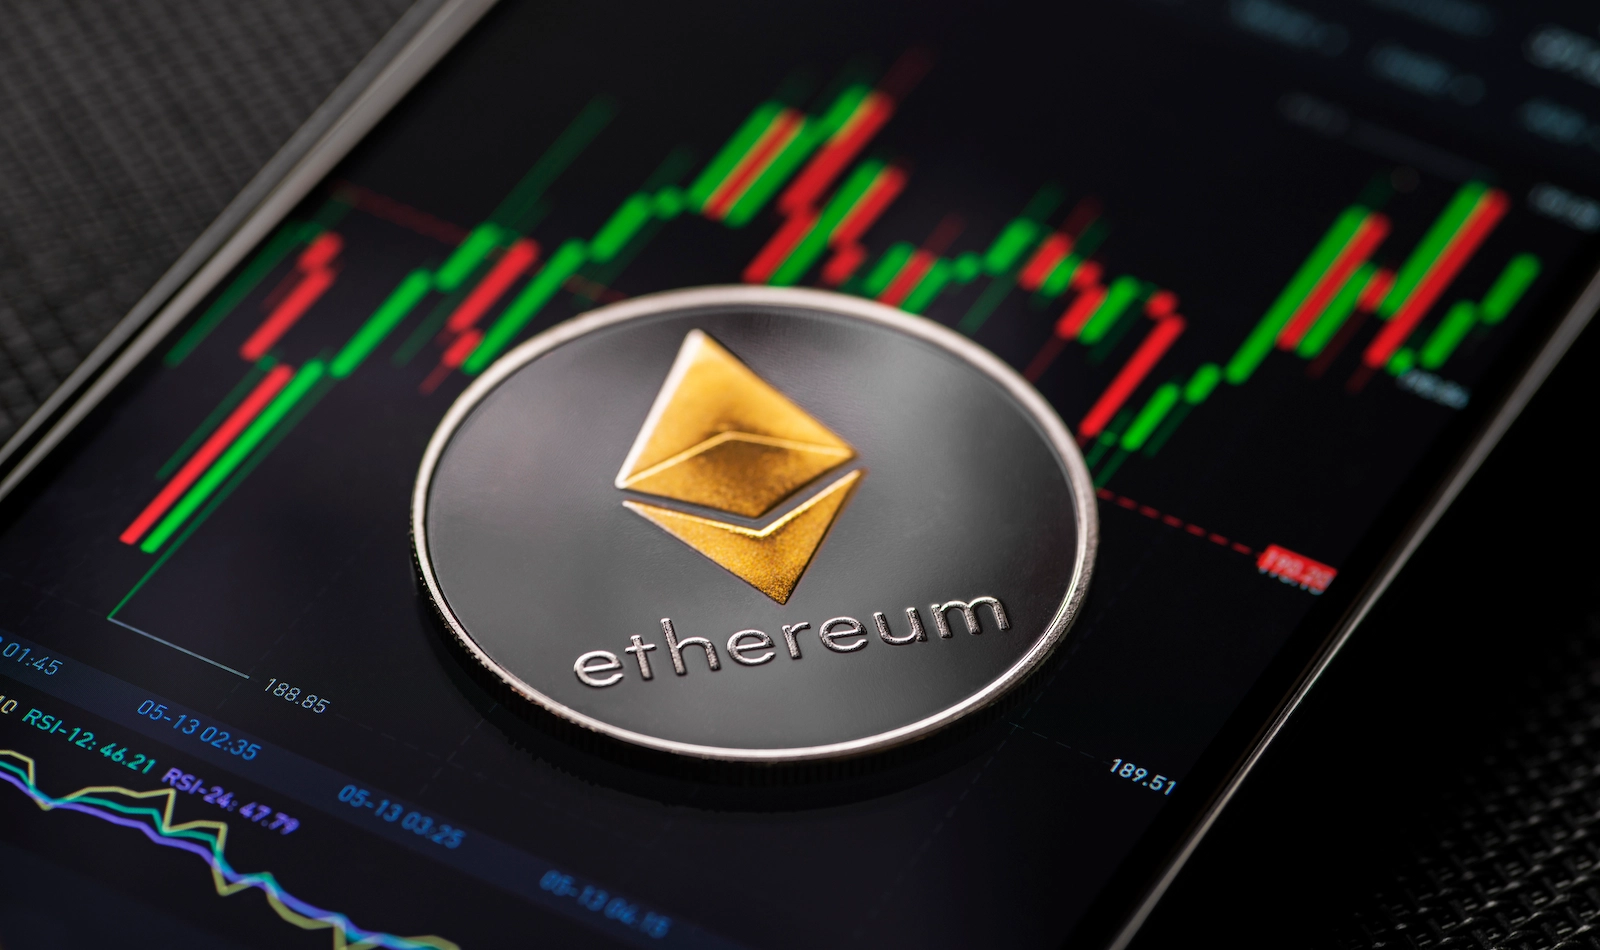 Ethereum locked reaches all-time high, but ETH price struggles to rally